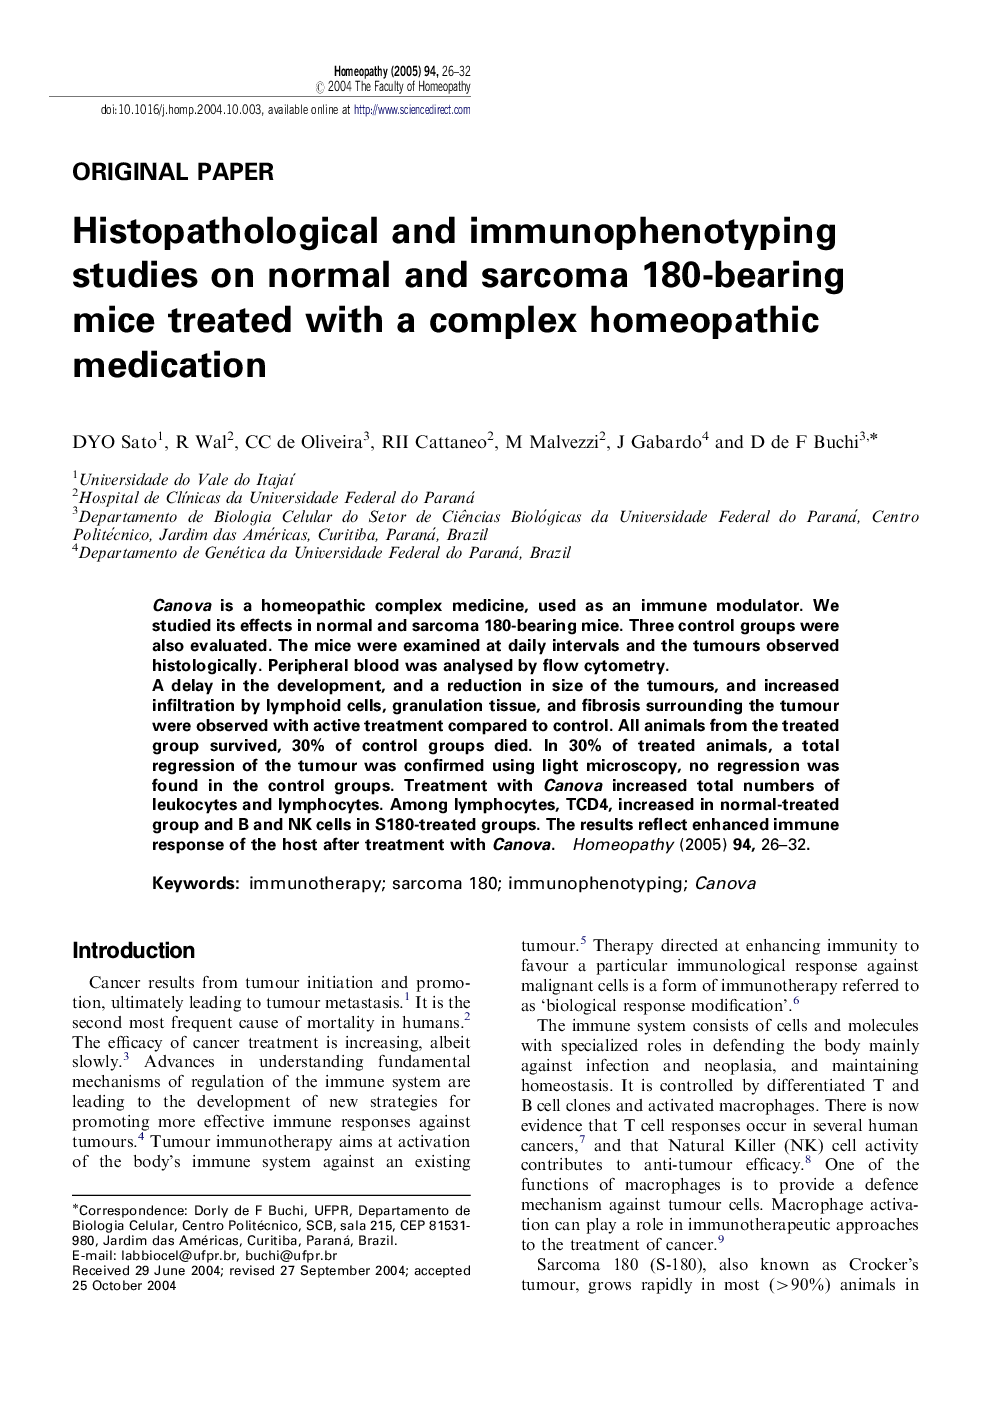 Histopathological and immunophenotyping studies on normal and sarcoma 180-bearing mice treated with a complex homeopathic medication